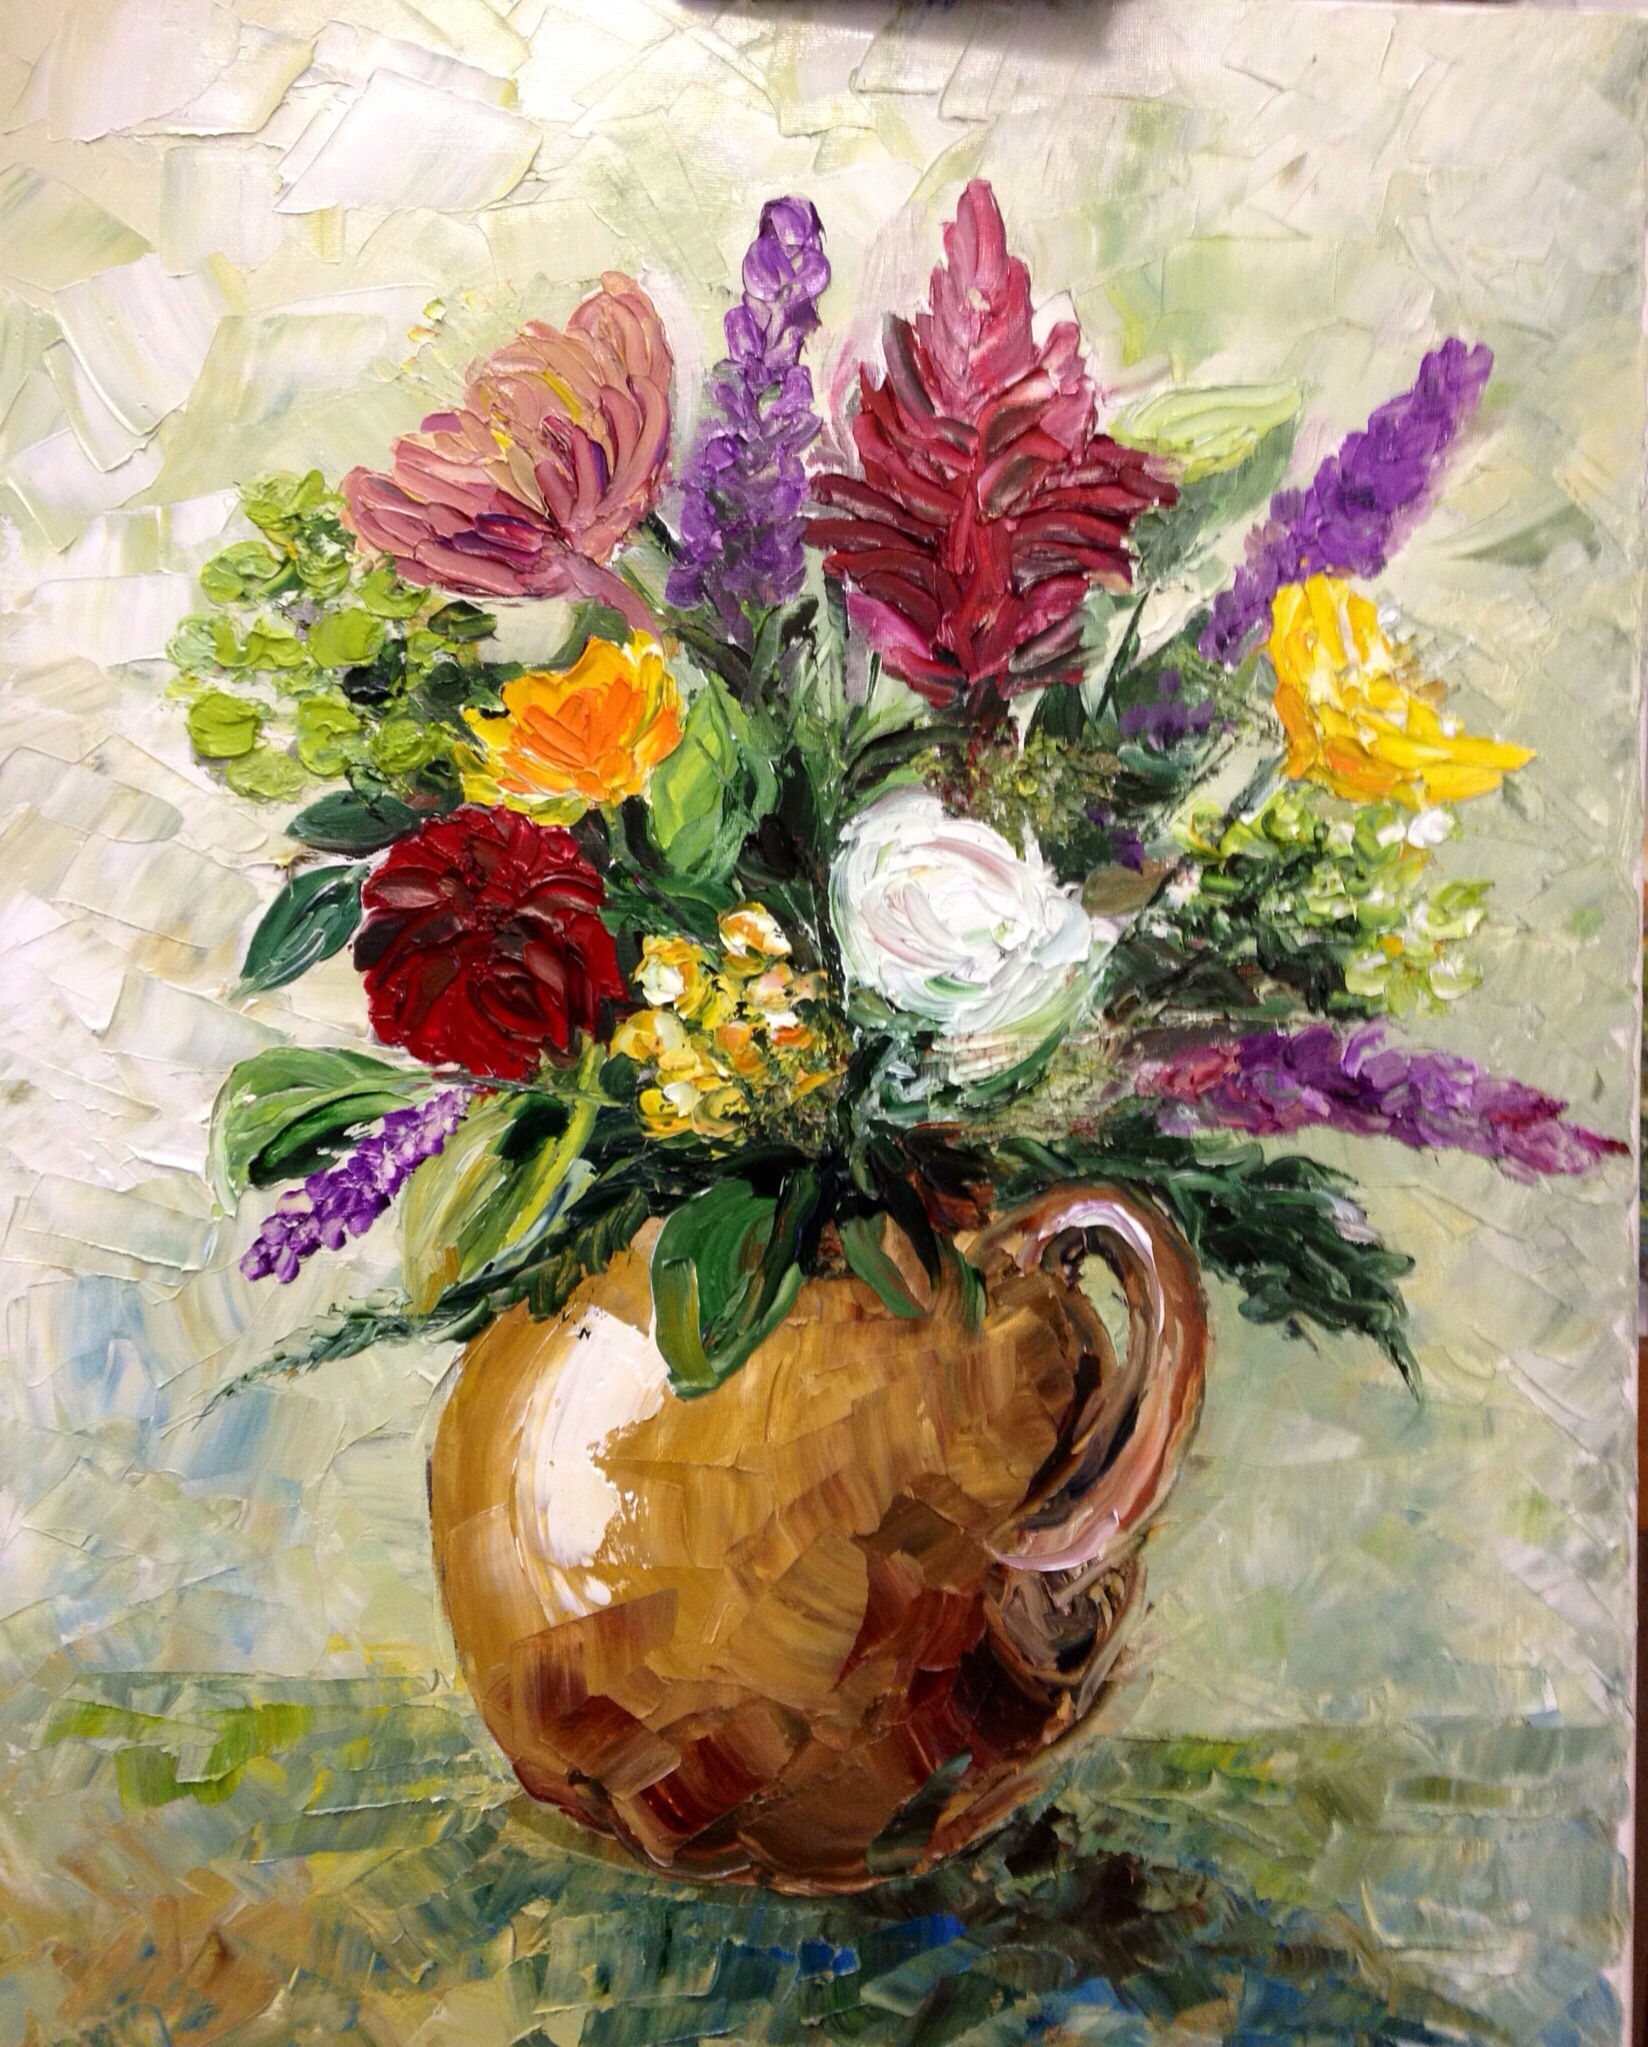 Winter Flowers 2 - Oil on Canvas